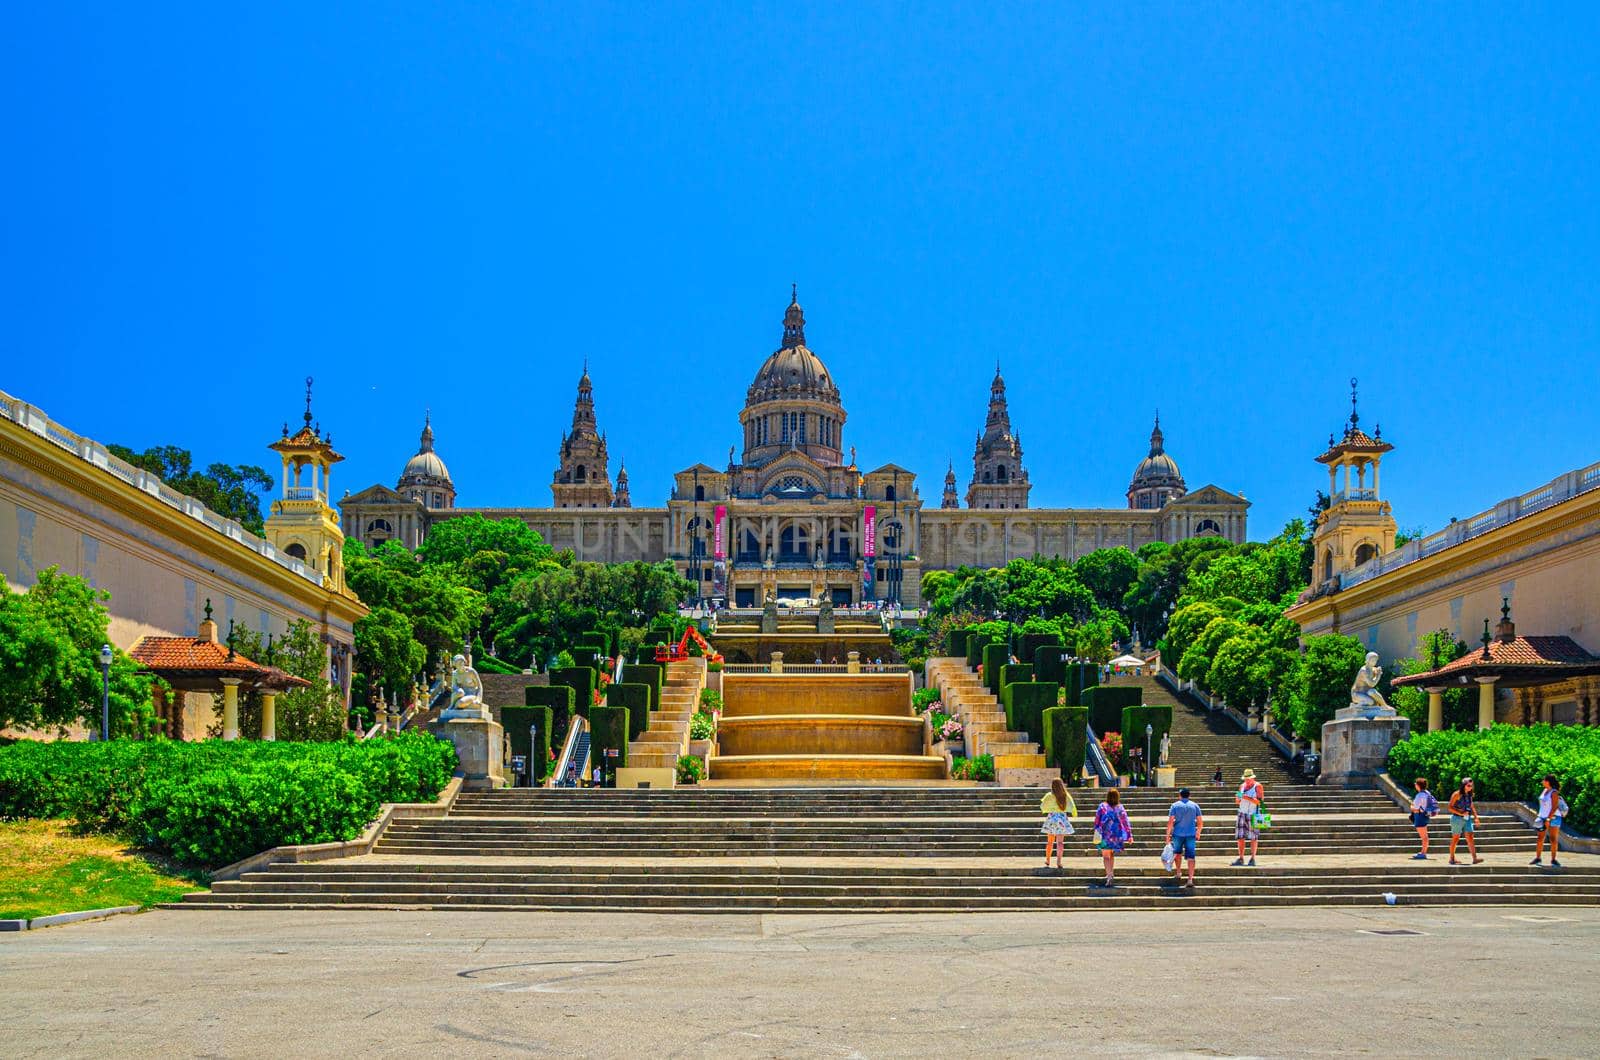 Barcelona, Spain, June 12, 2017: Palau Nacional or National Palace of Montju c and National Art Museum of Catalonia and walking tourists in historical city centre, blue sky in sunny day background